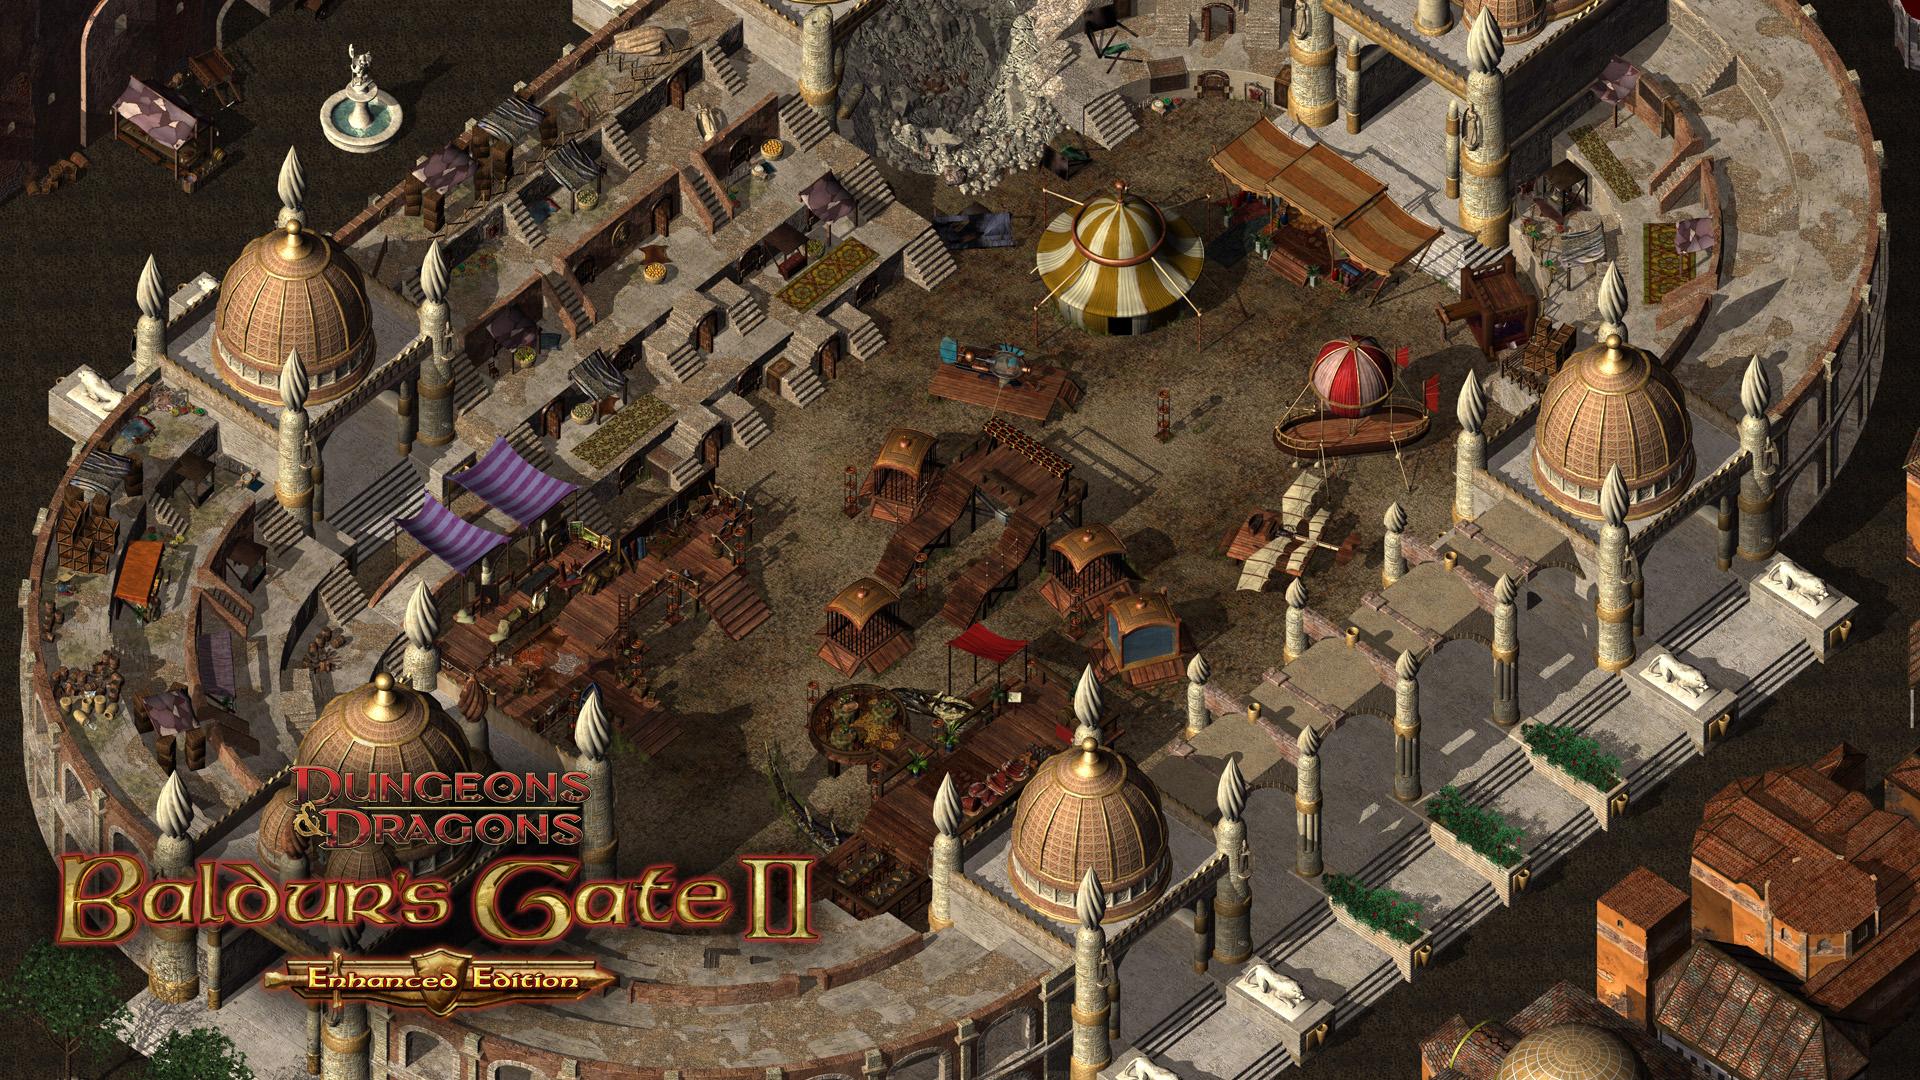 Baldur's Gate II: Enhanced Edition comes to Android for $9.99